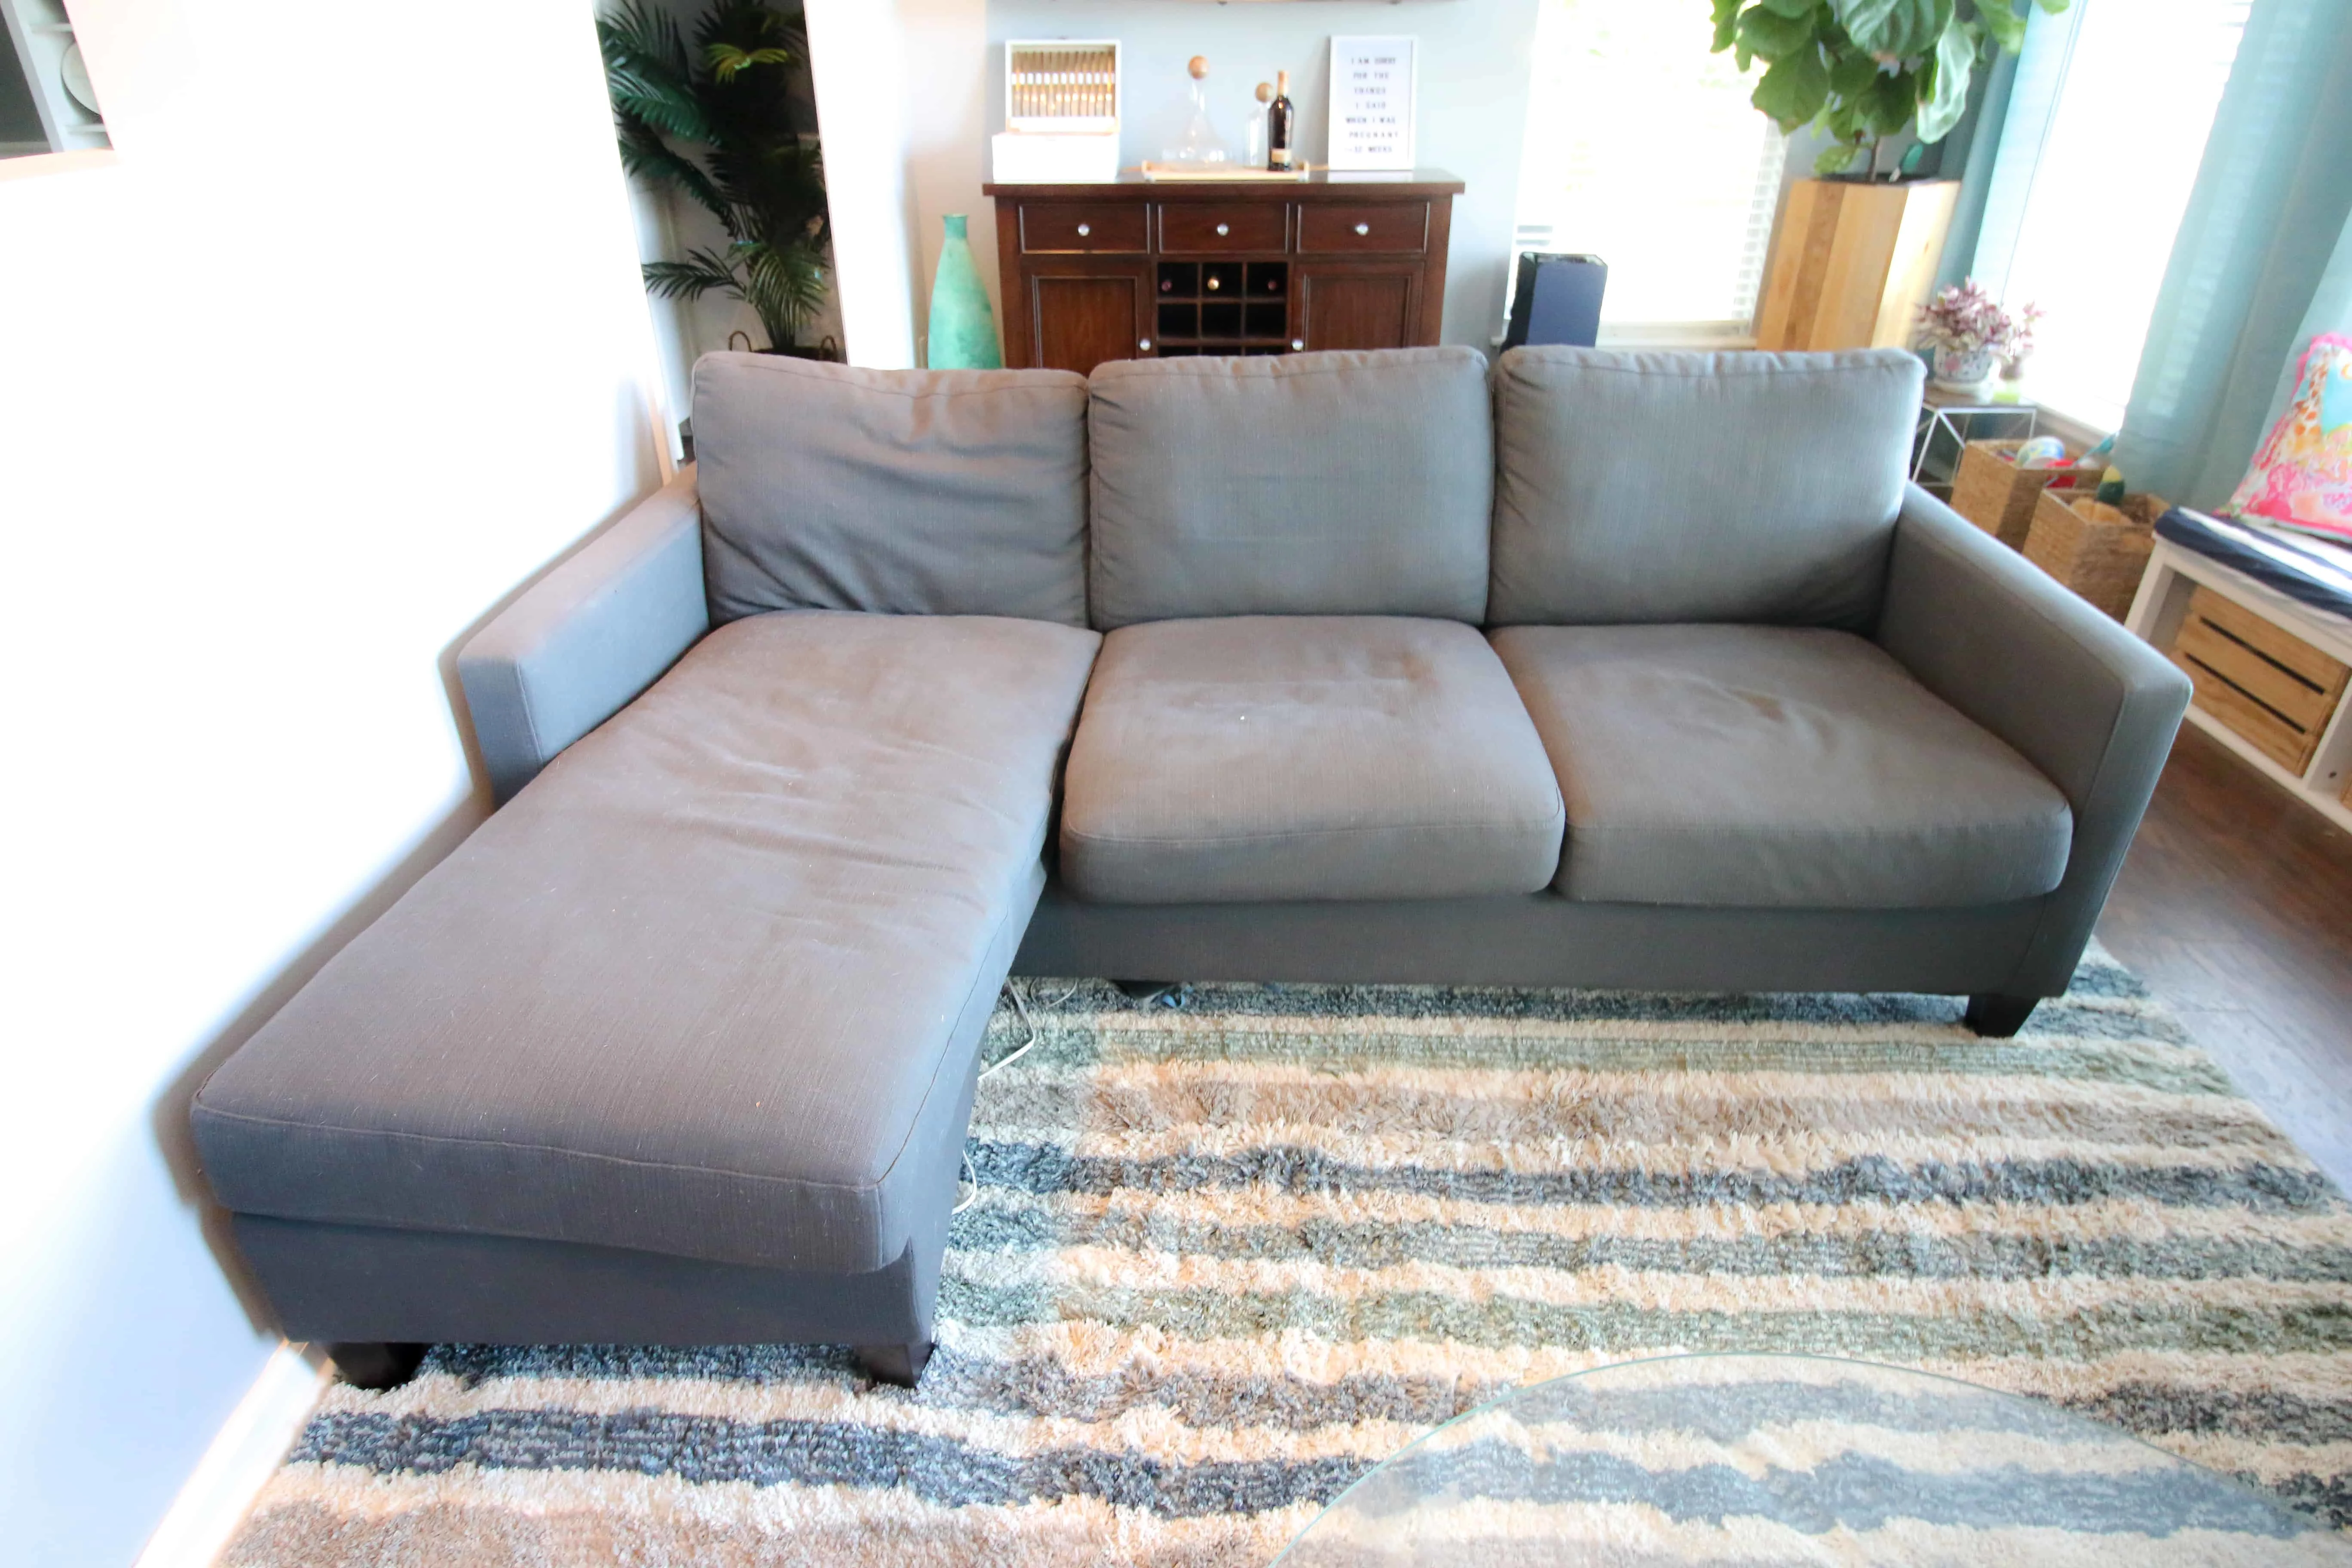 How to stuff sofa cushions couch before restuffing